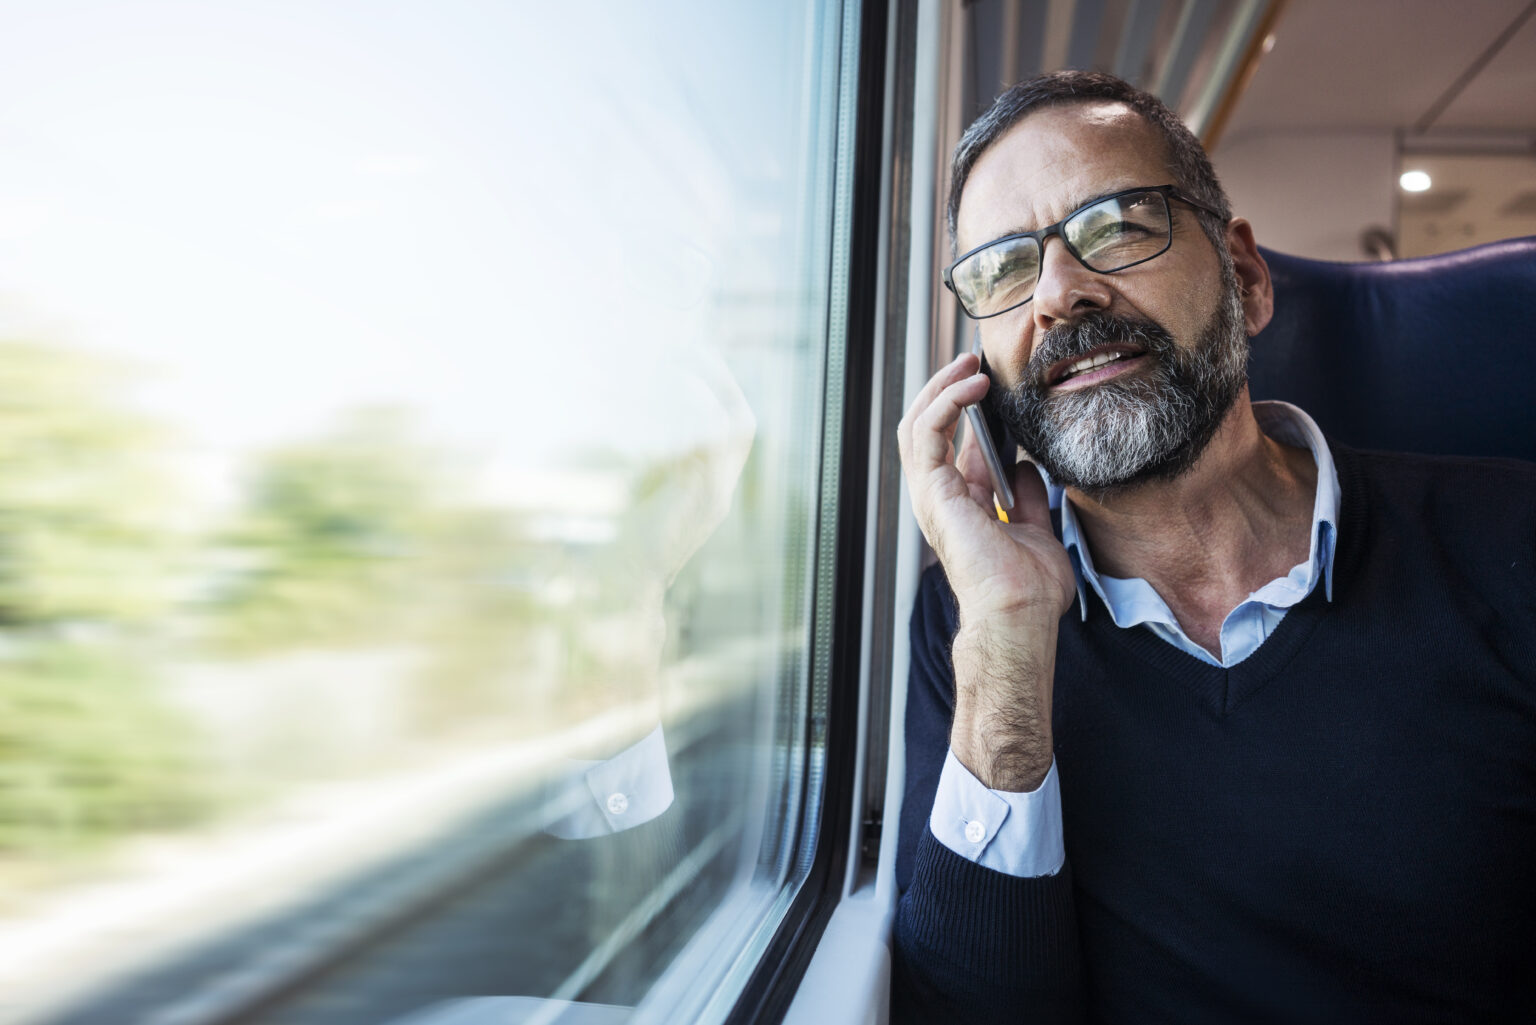 Man on train looking out of window while talking on a mobile phone.